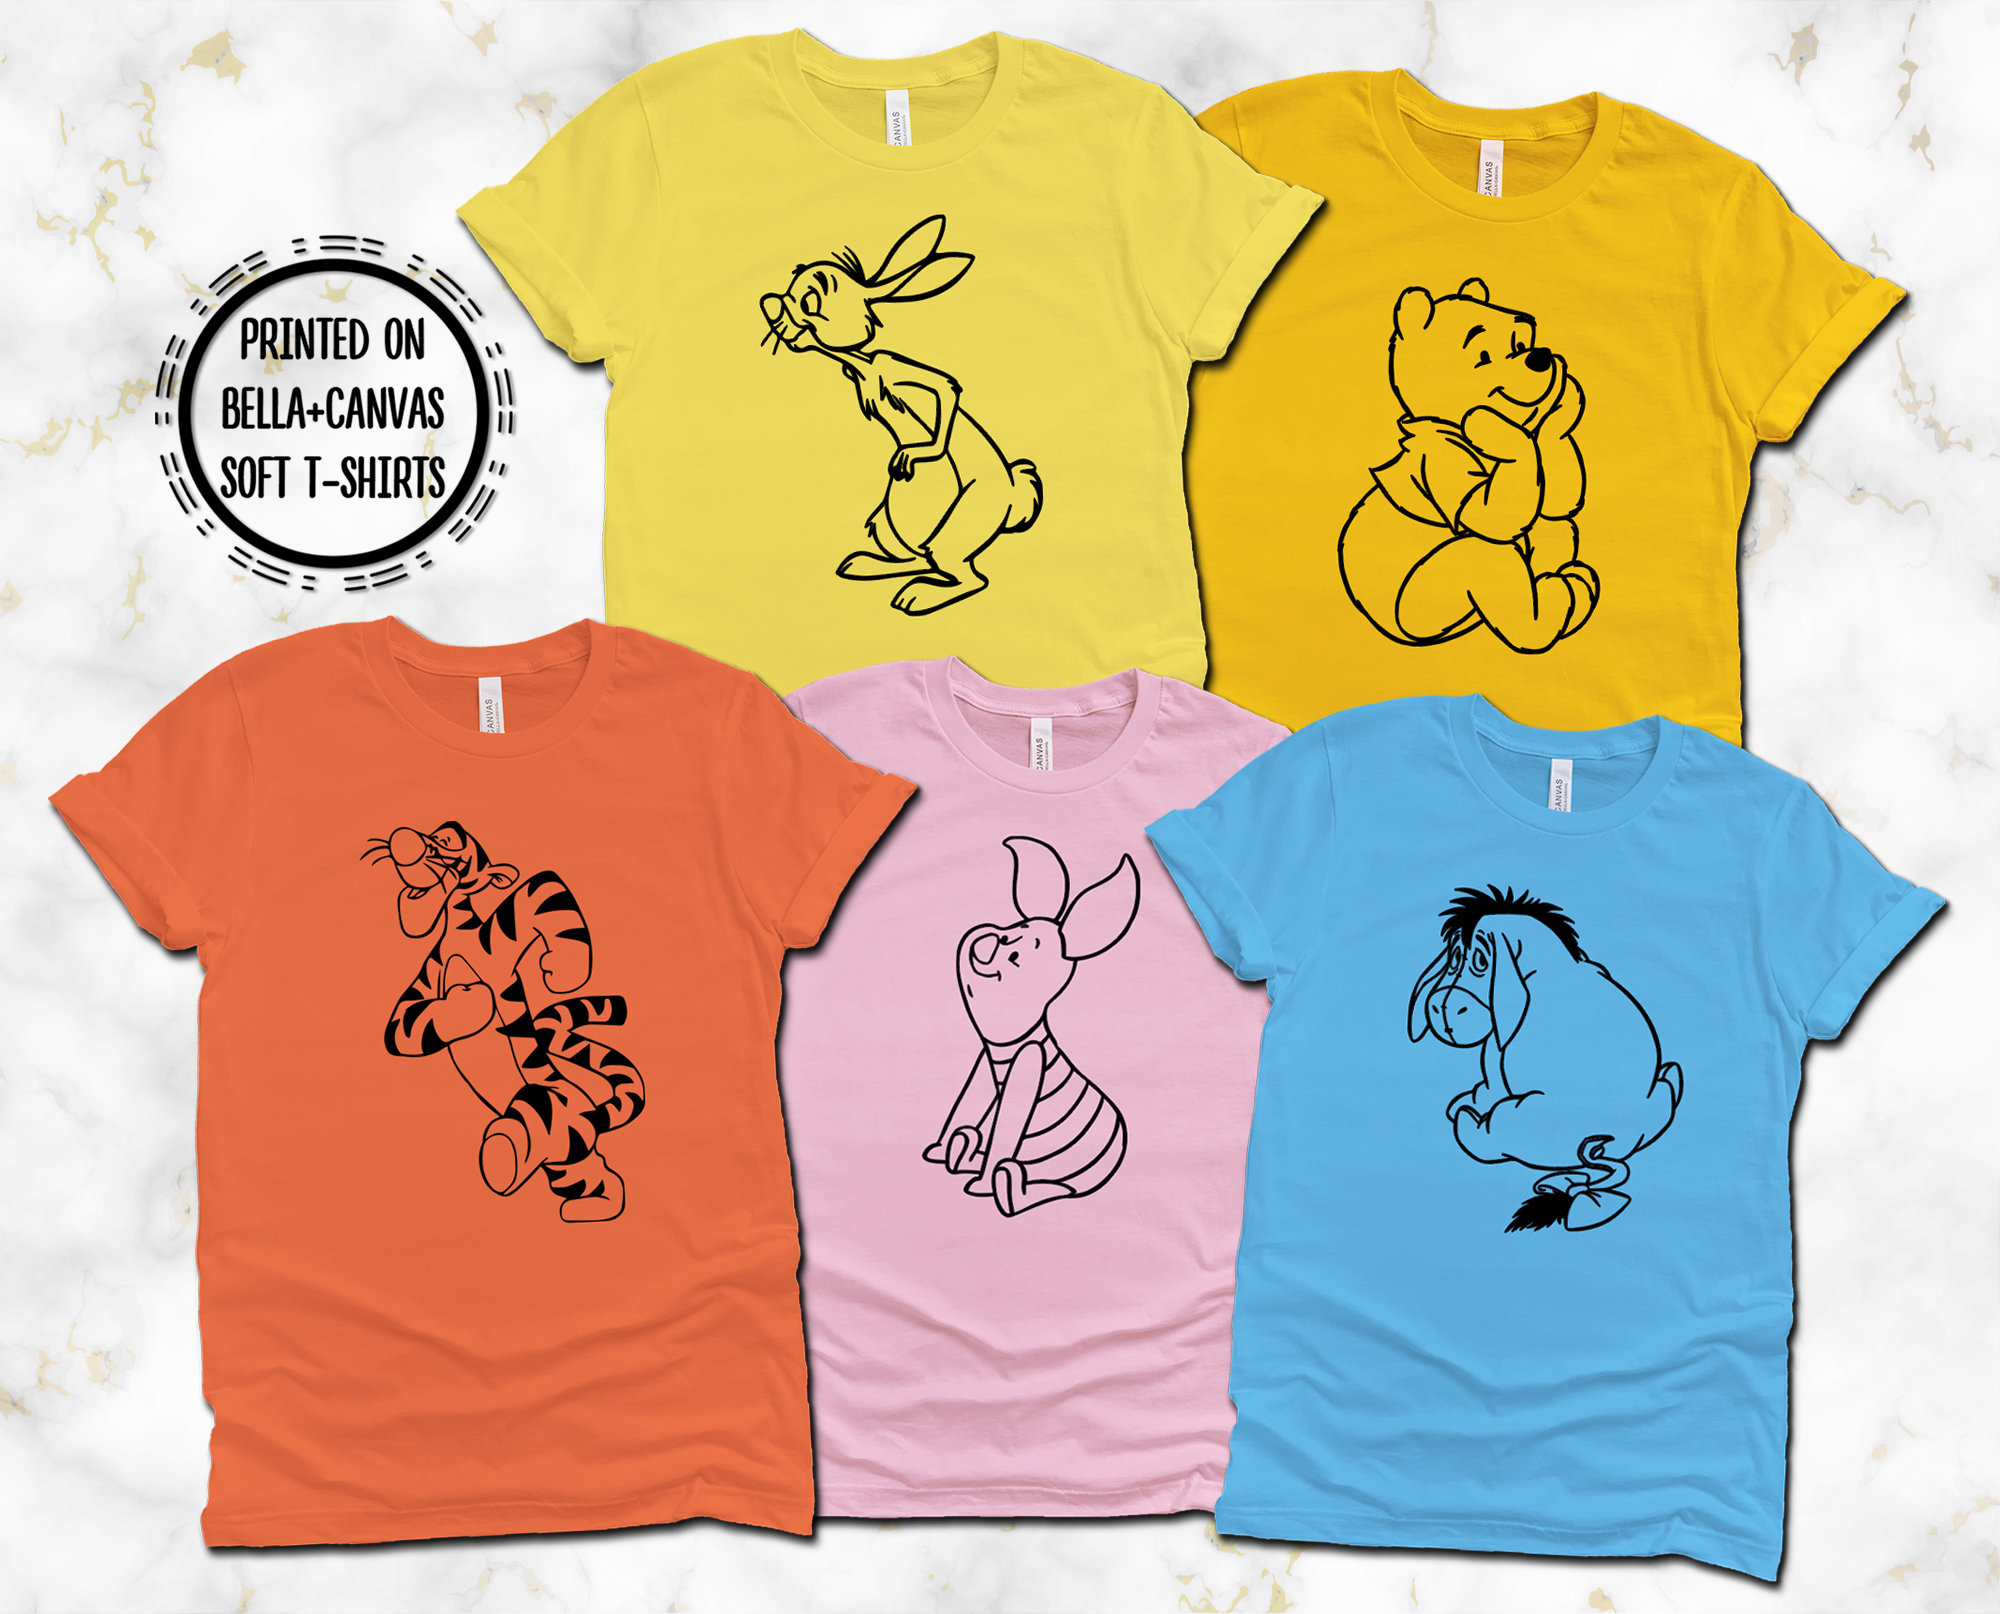 Winnie the Pooh T-shirts, Rabbit, Tigger, Piglet, Outline Printed Canvas T-shirts, Eeyore on Friends Winnie Etsy Pooh, and - Bella T-shirts Print